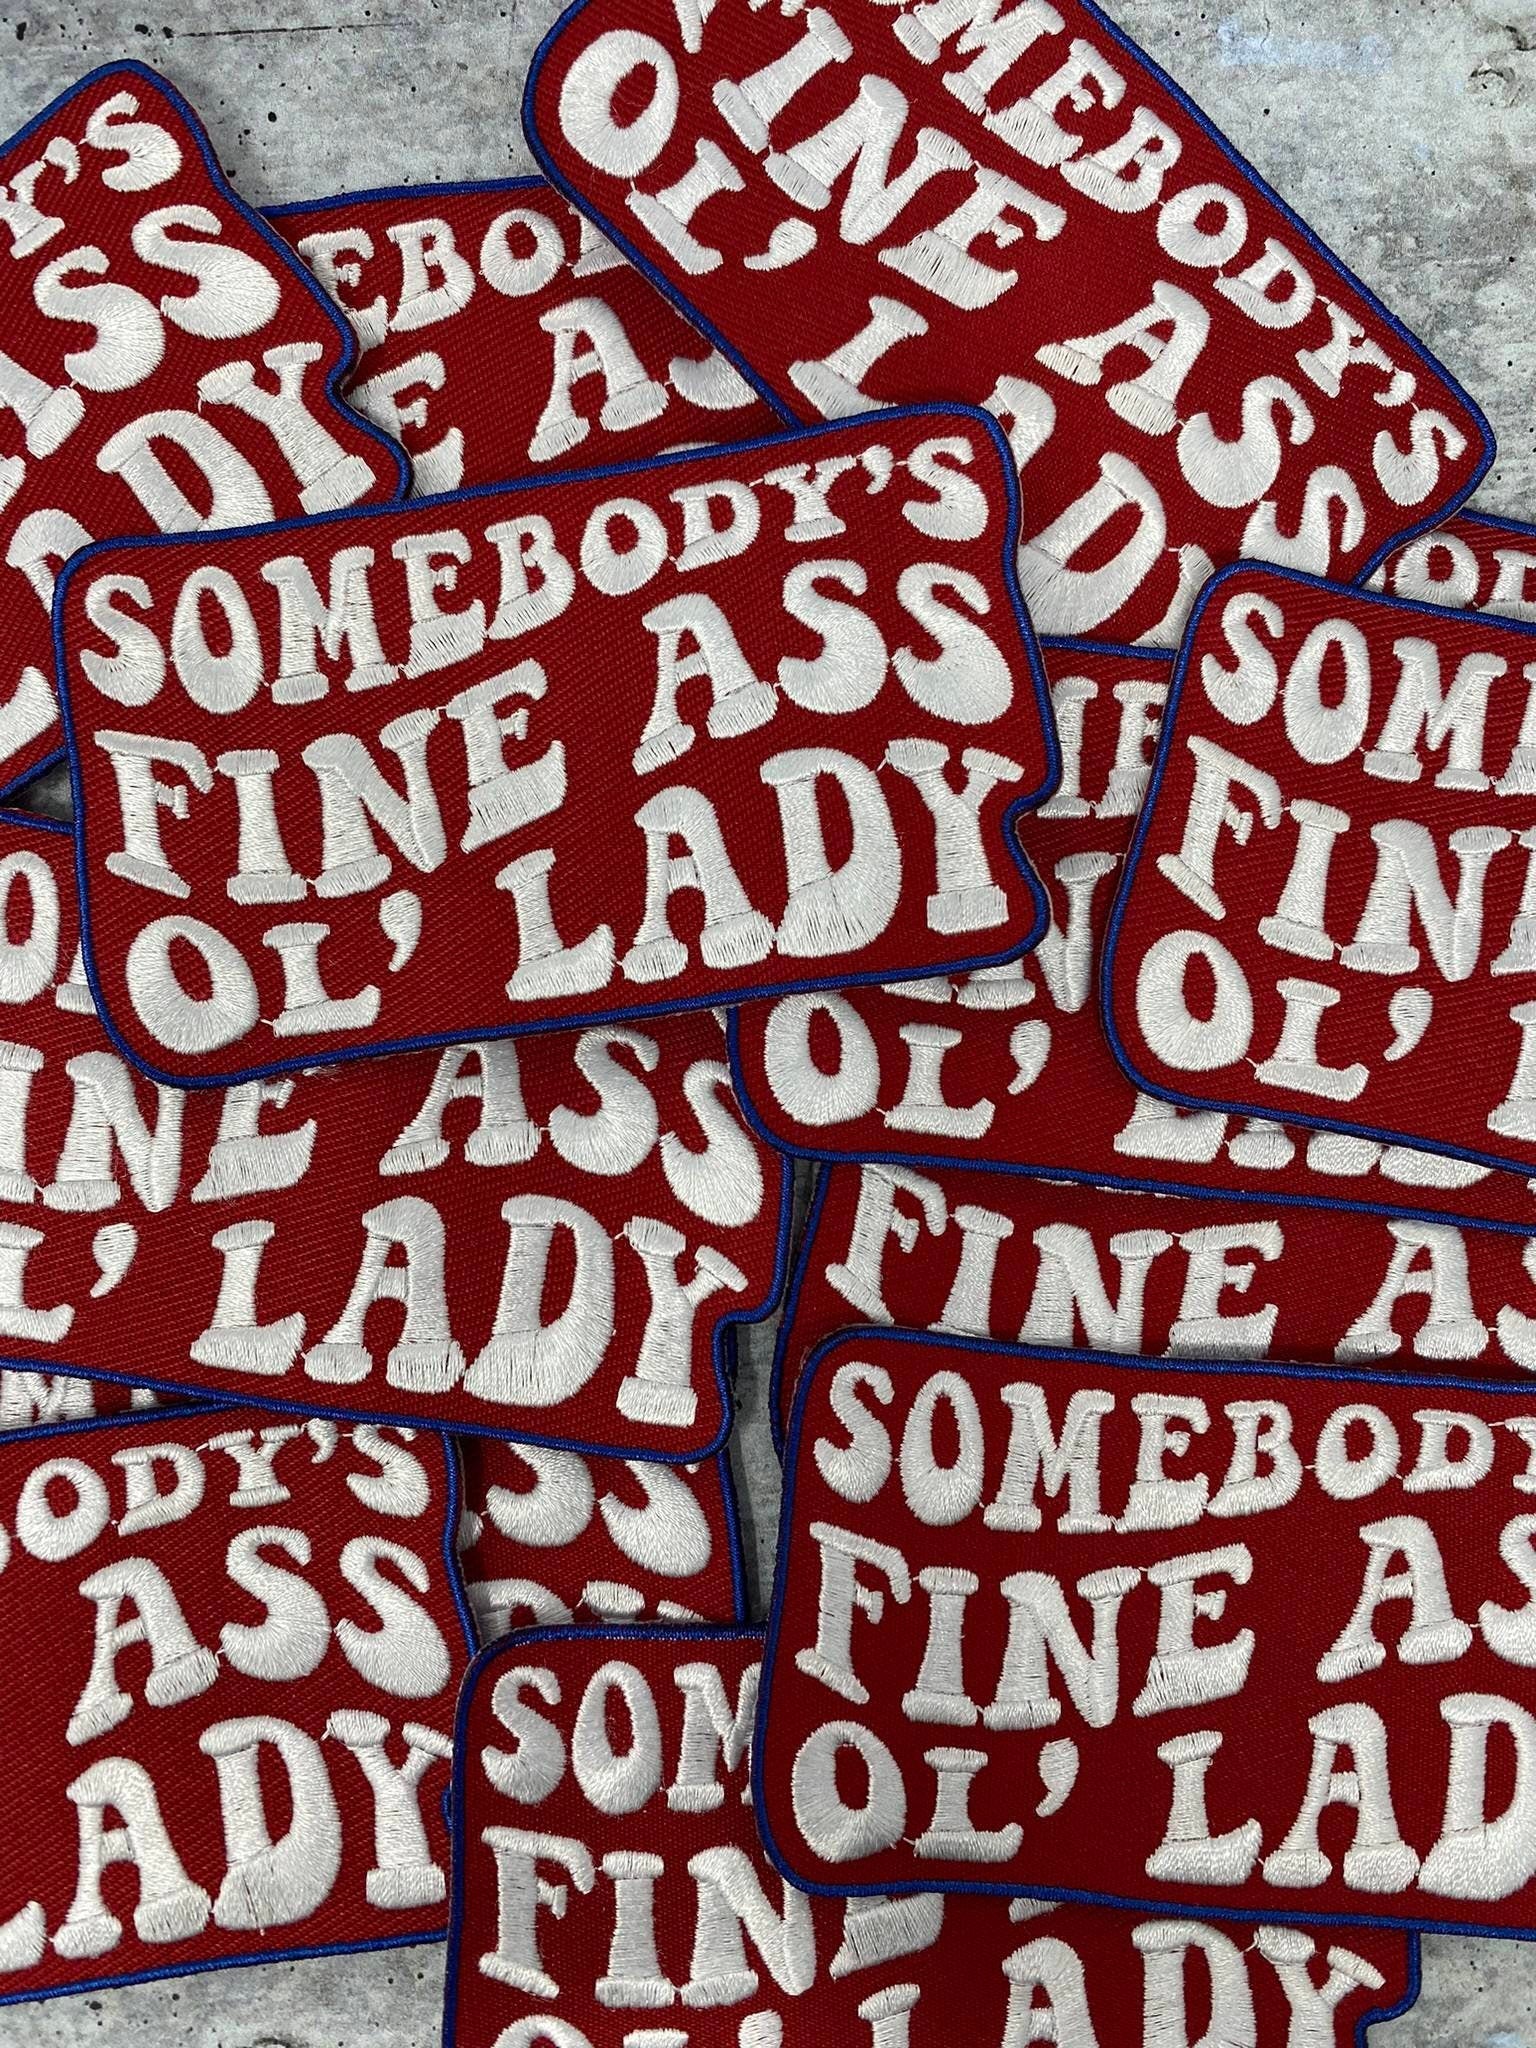 New, "Somebody's Fine Ass OL' LADY" 1-pc, Iron-on Embroidered Patch, Cute Patch for Jackets, Hats, Crocs, Gifts for Mother, Funny Gifts